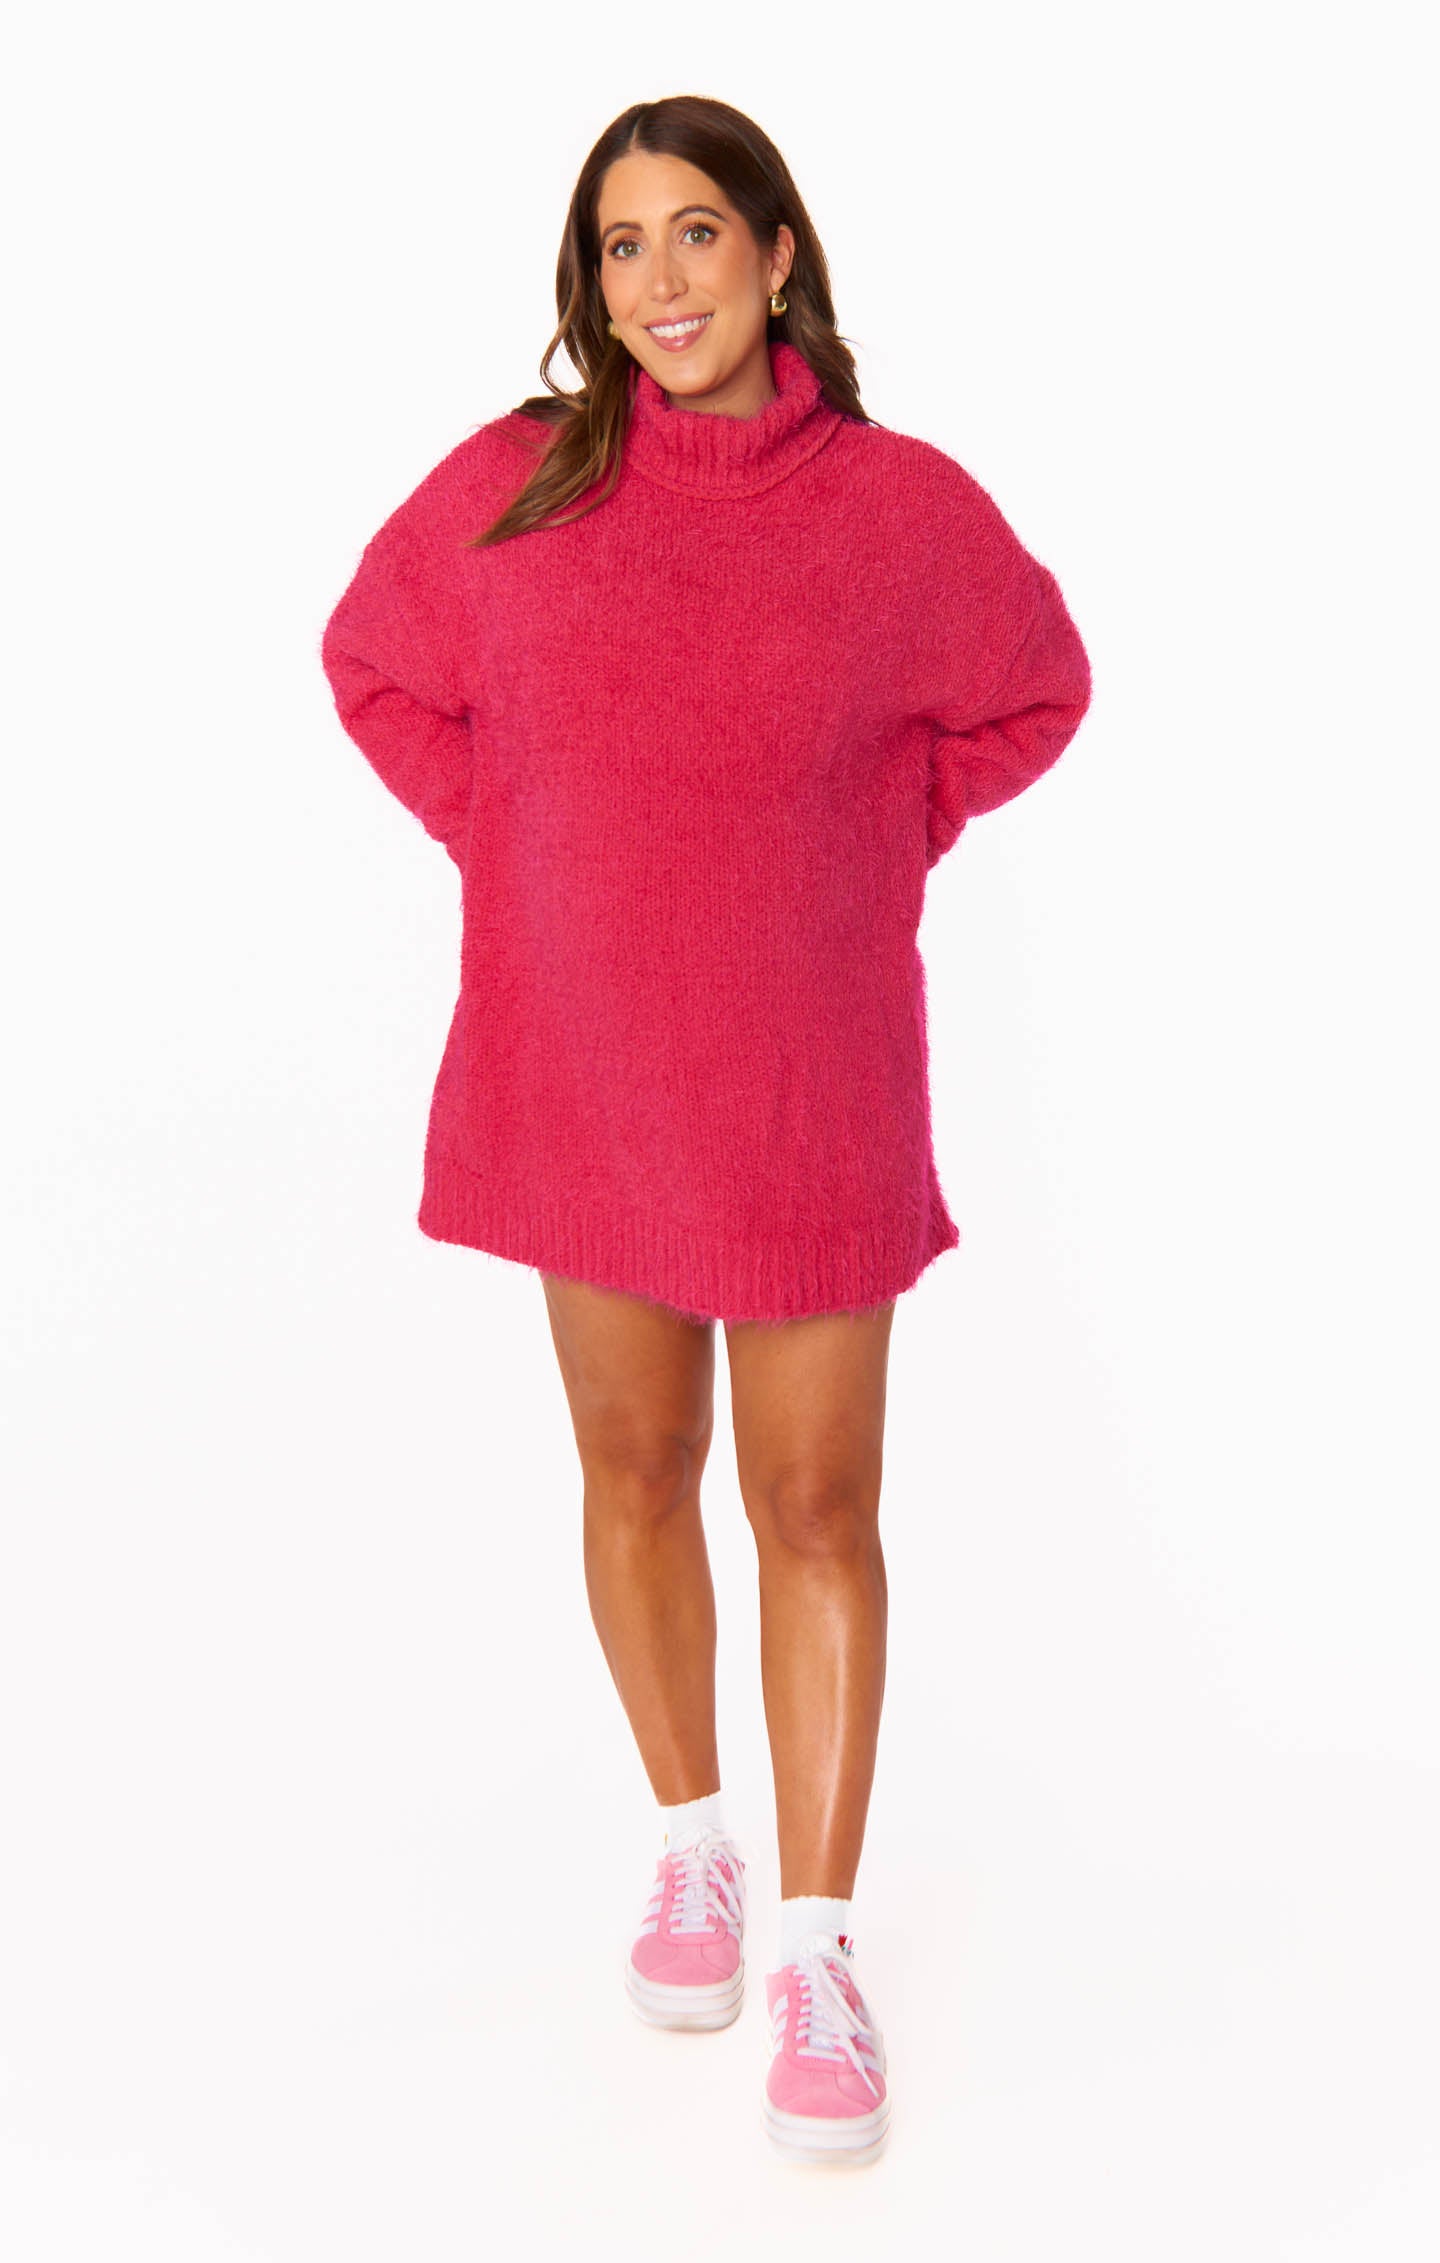 Day to Day Tunic Sweater ~ Pink Cable Knit – Show Me Your Mumu